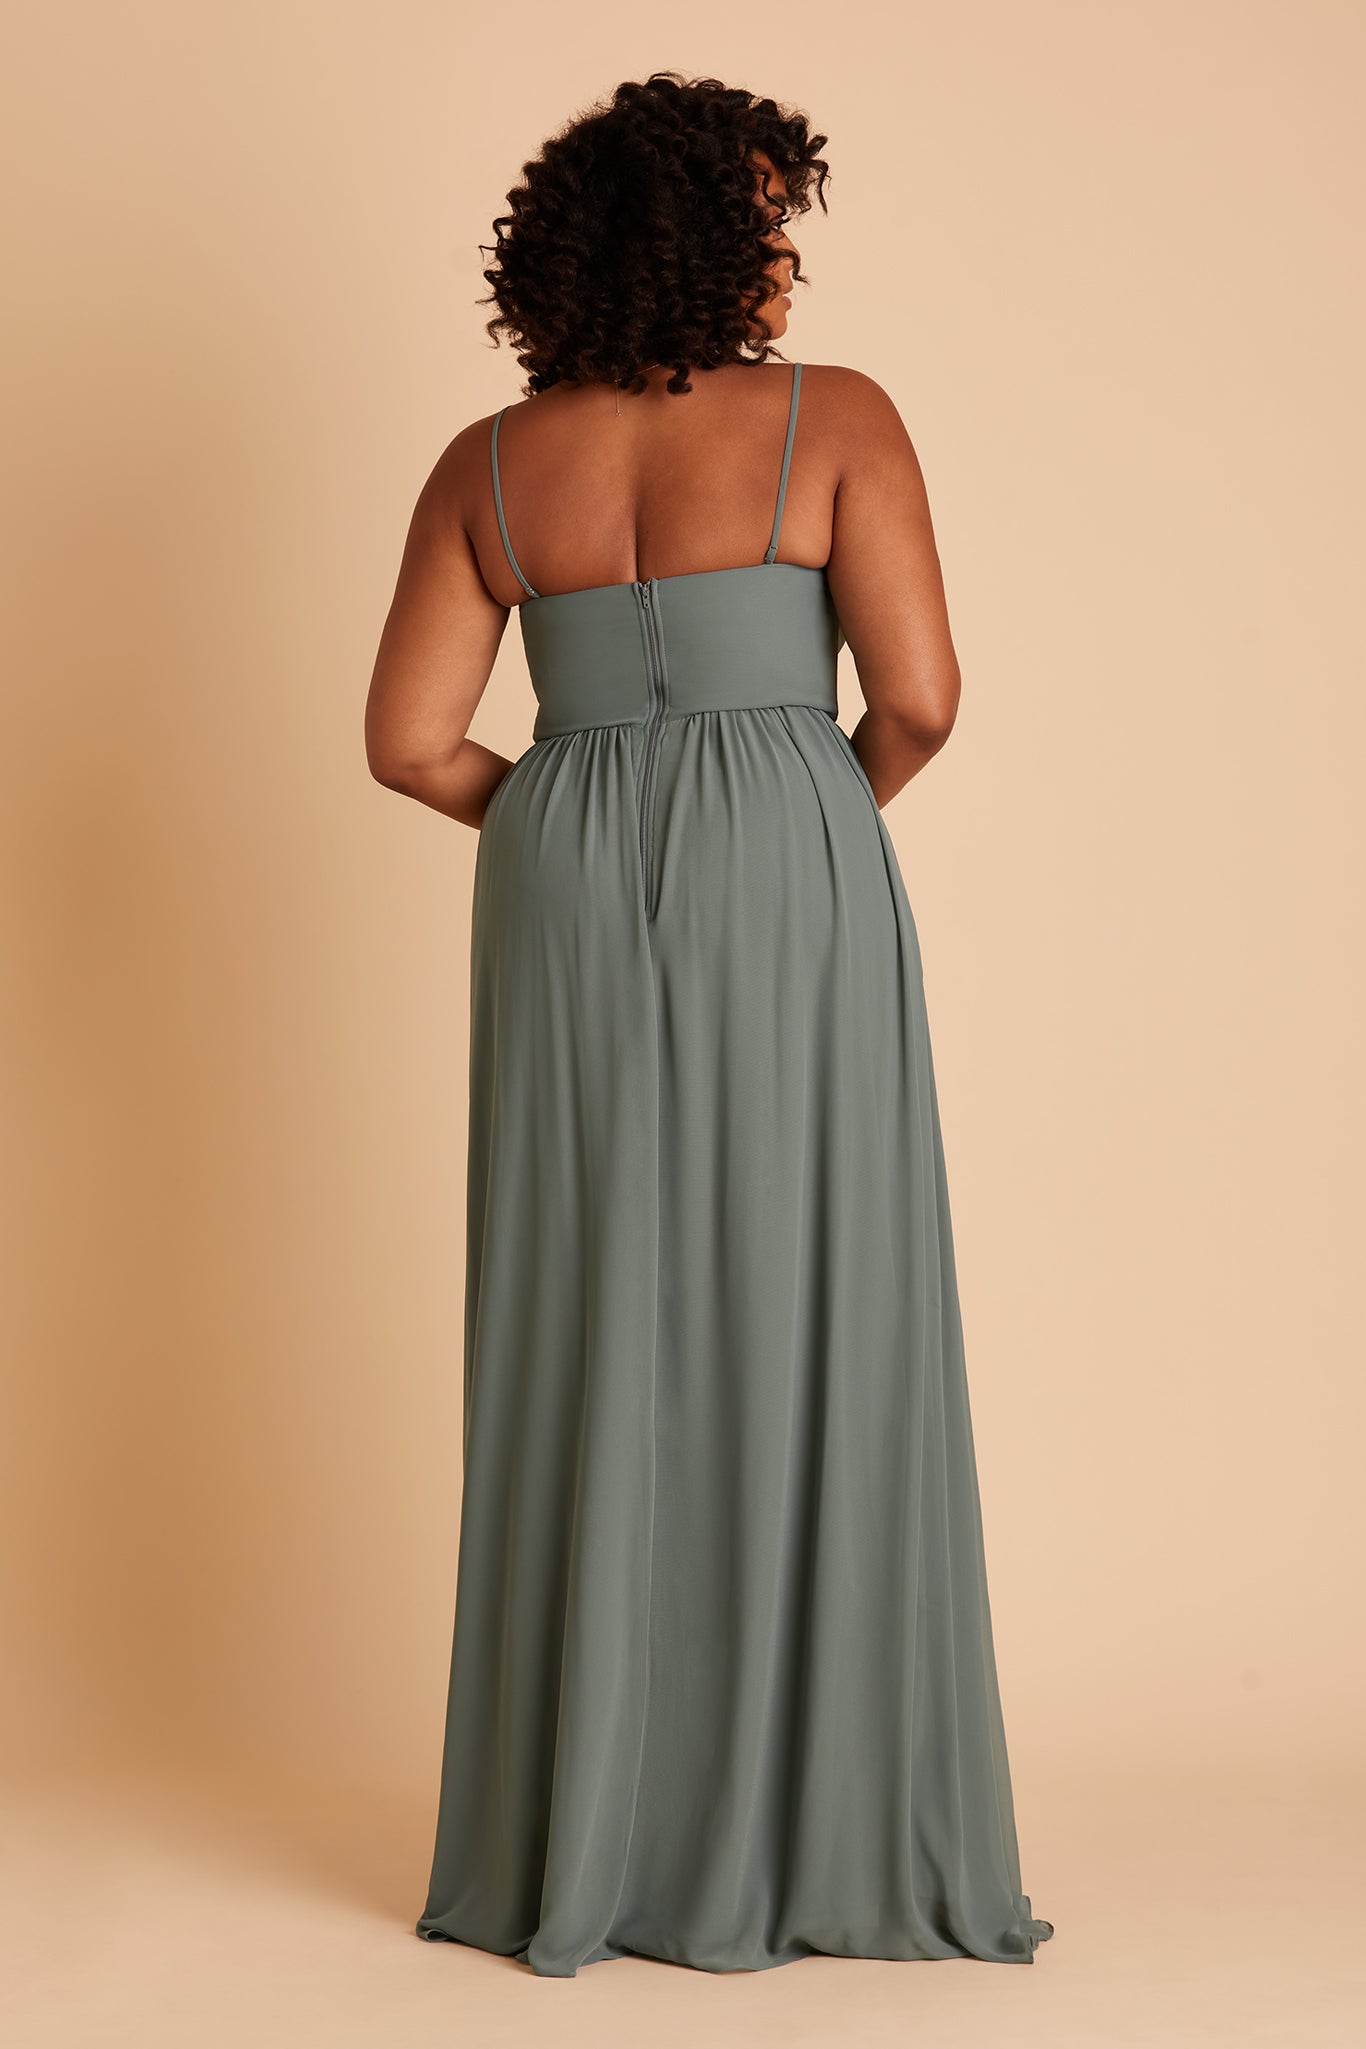 August plus size bridesmaid dress with slit in sea glass chiffon by Birdy Grey, back view